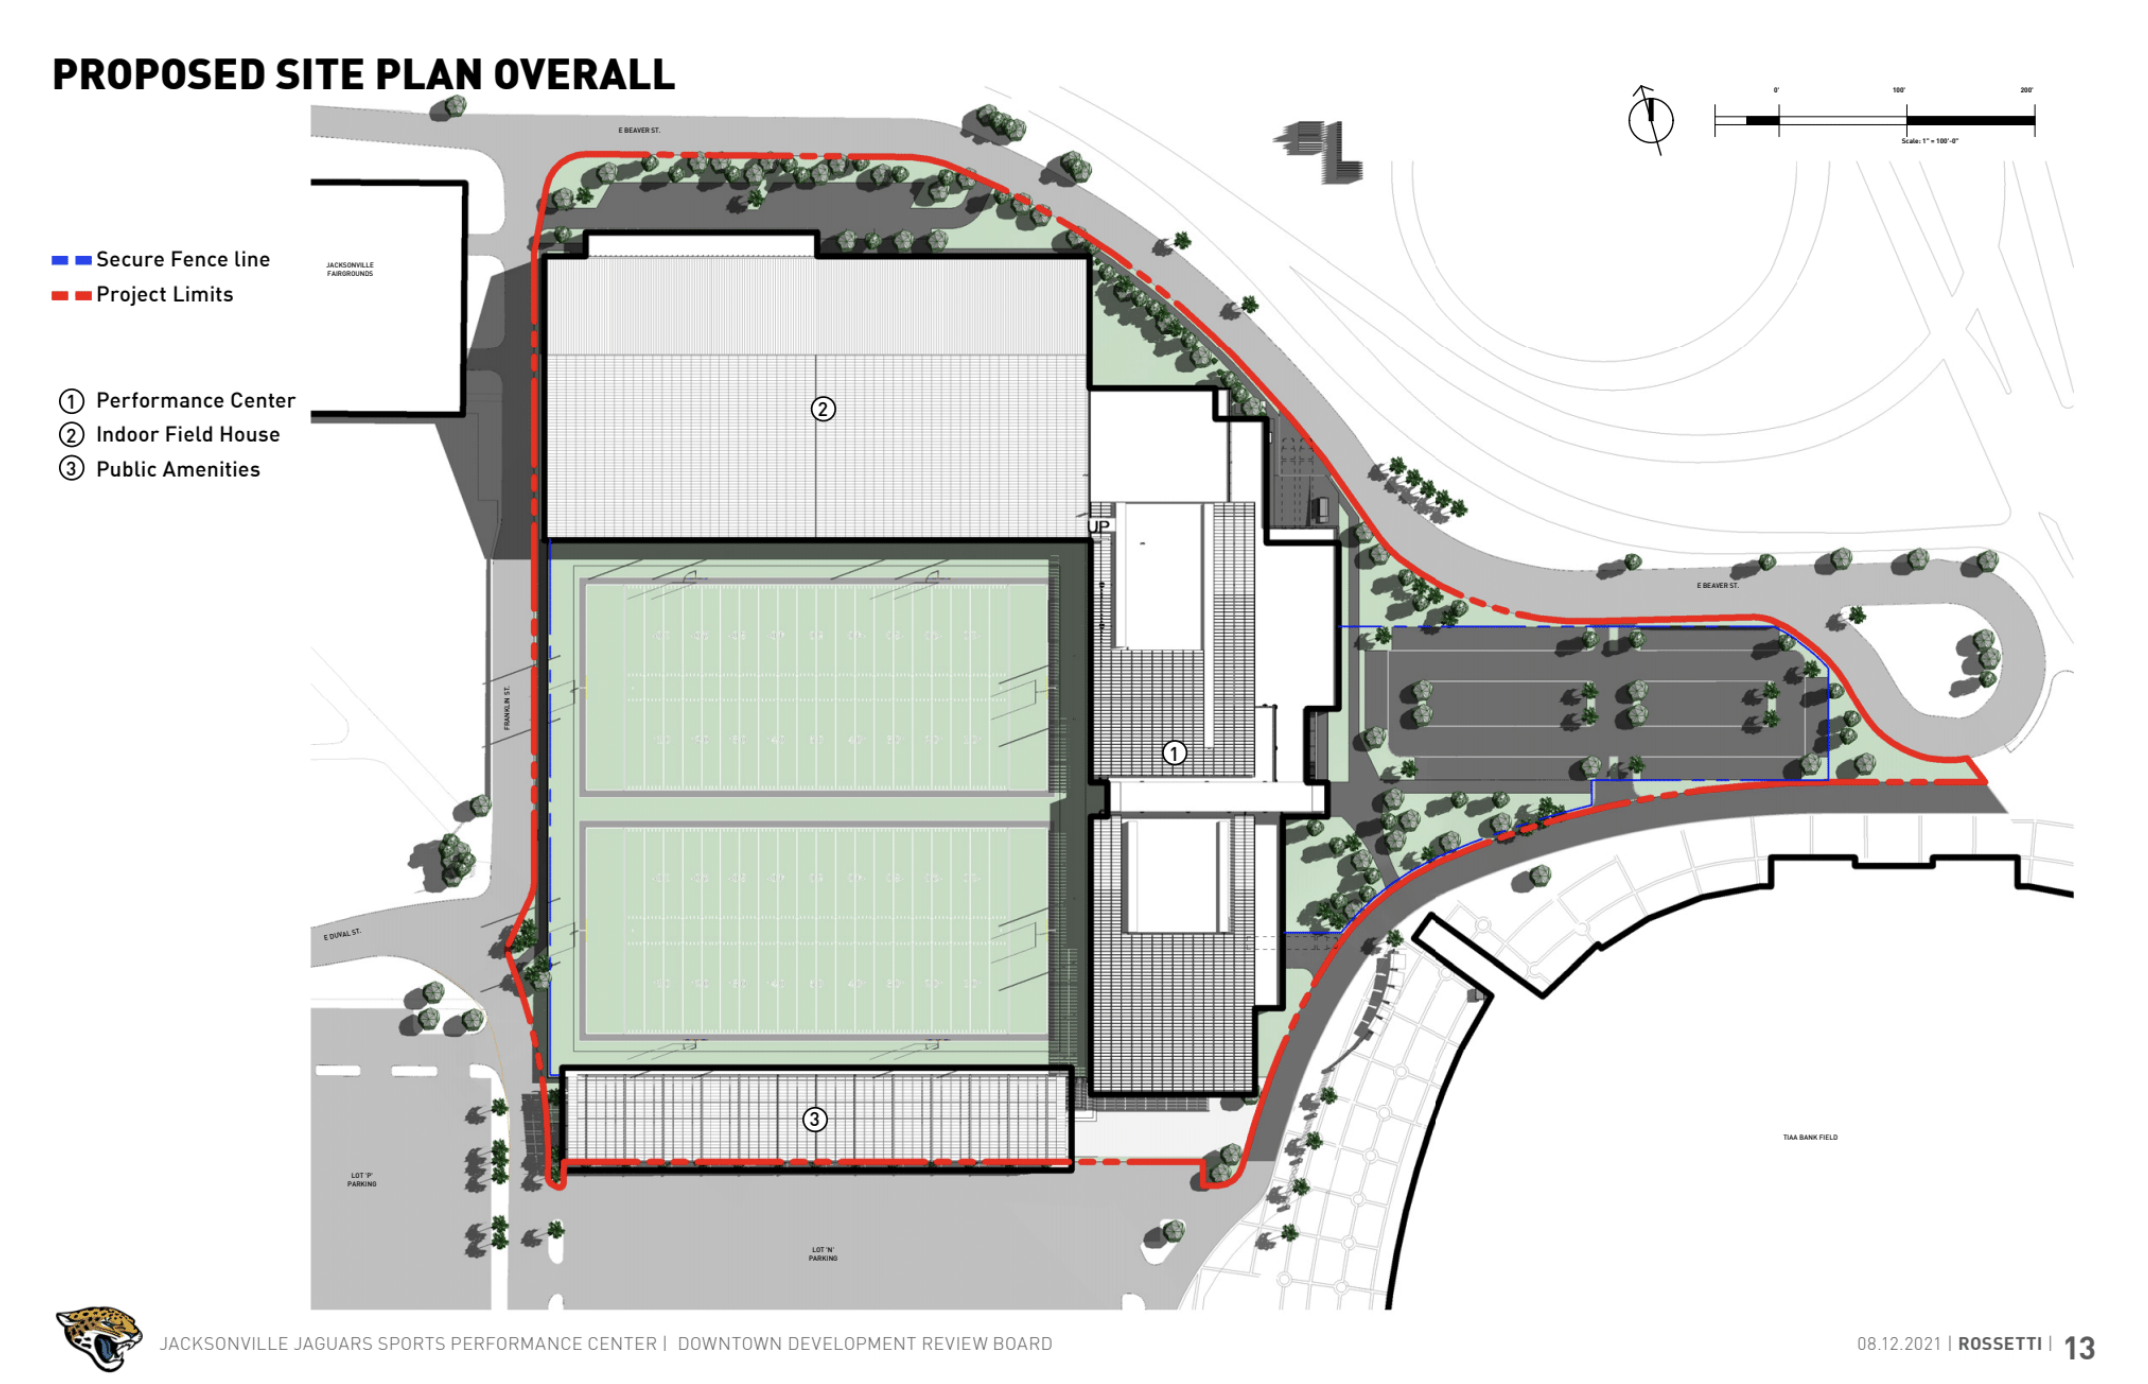 Overall Site Plan. Courtesy of Rossetti Architects.